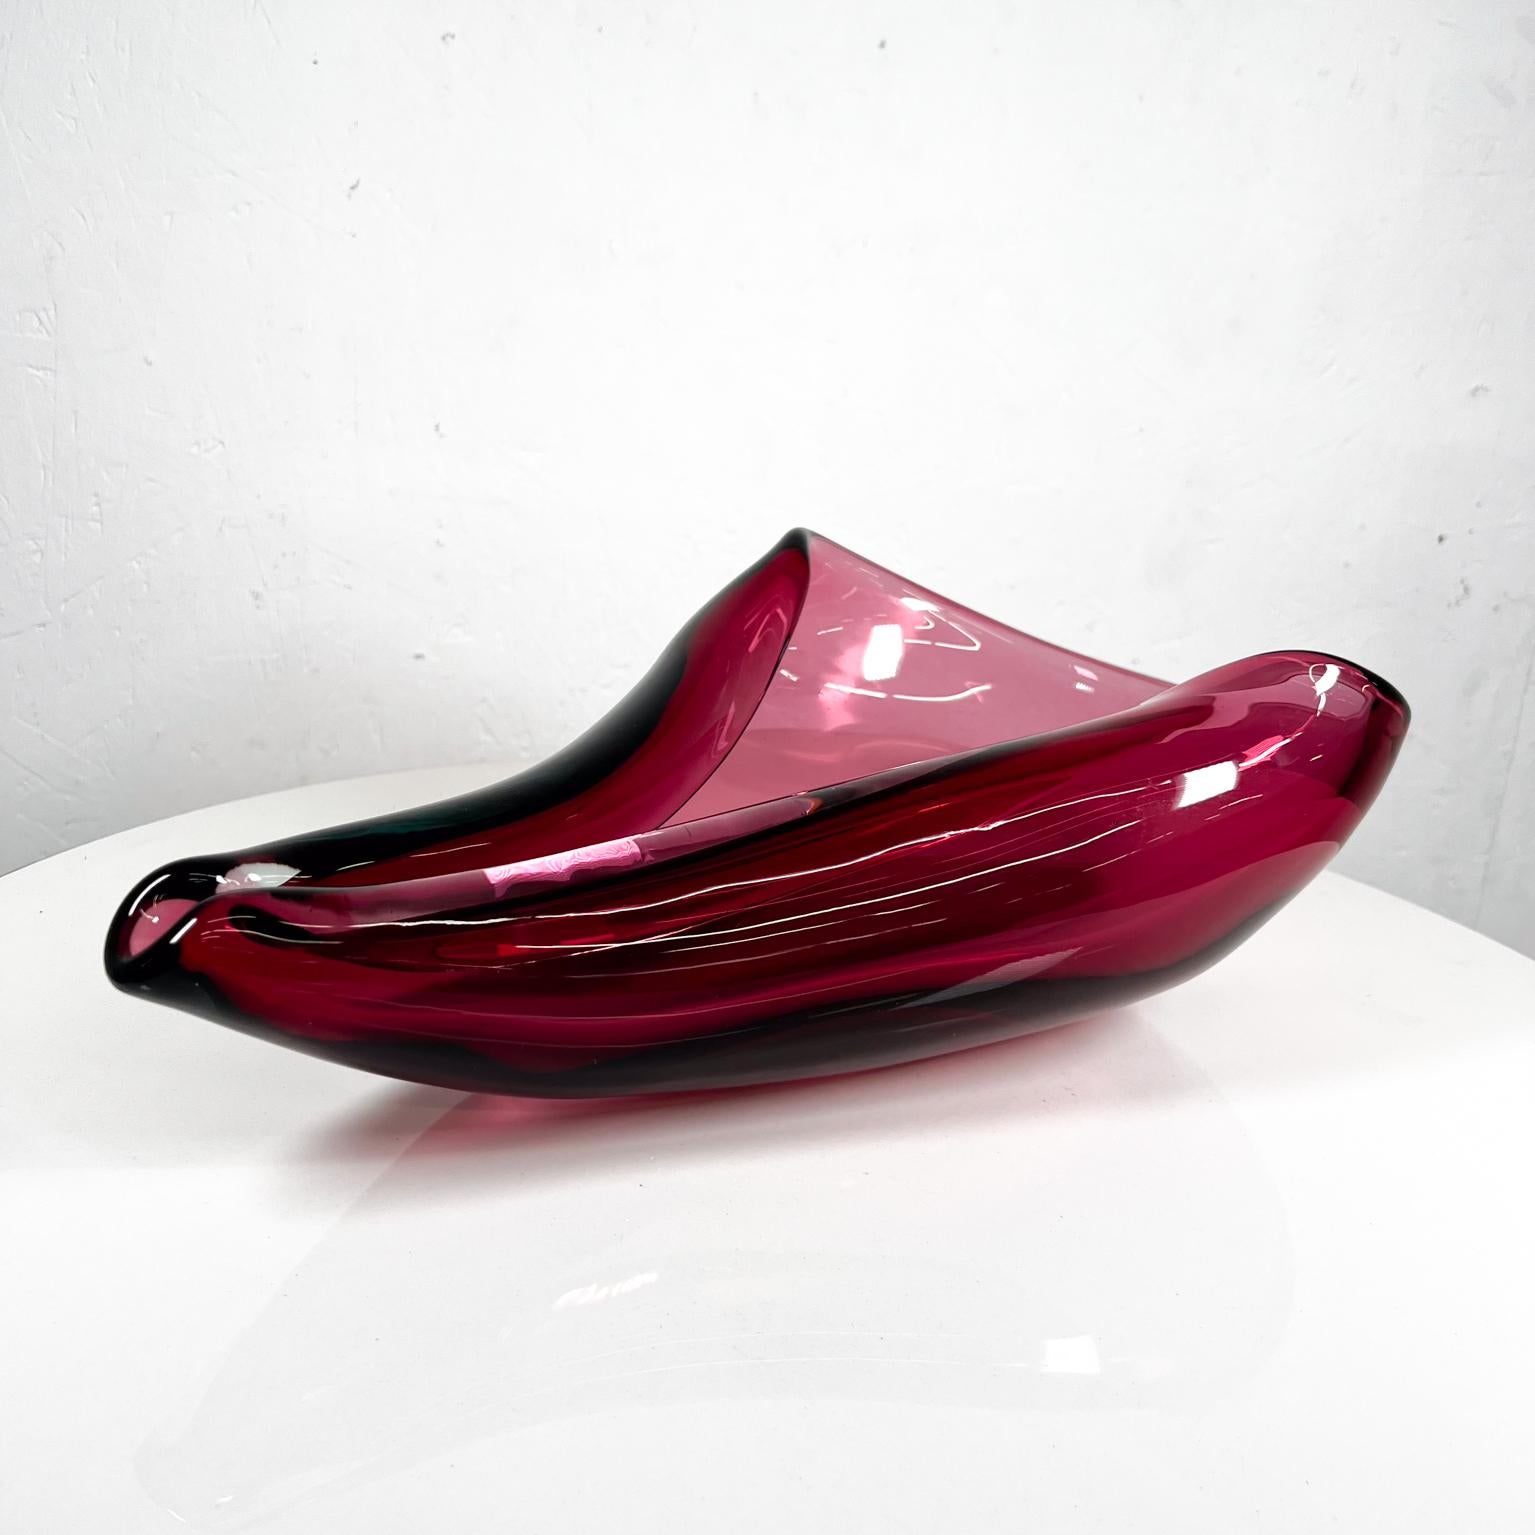 1960s Murano Sommerso Bowl Art Glass Organic Modernist Design Italy In Good Condition For Sale In Chula Vista, CA